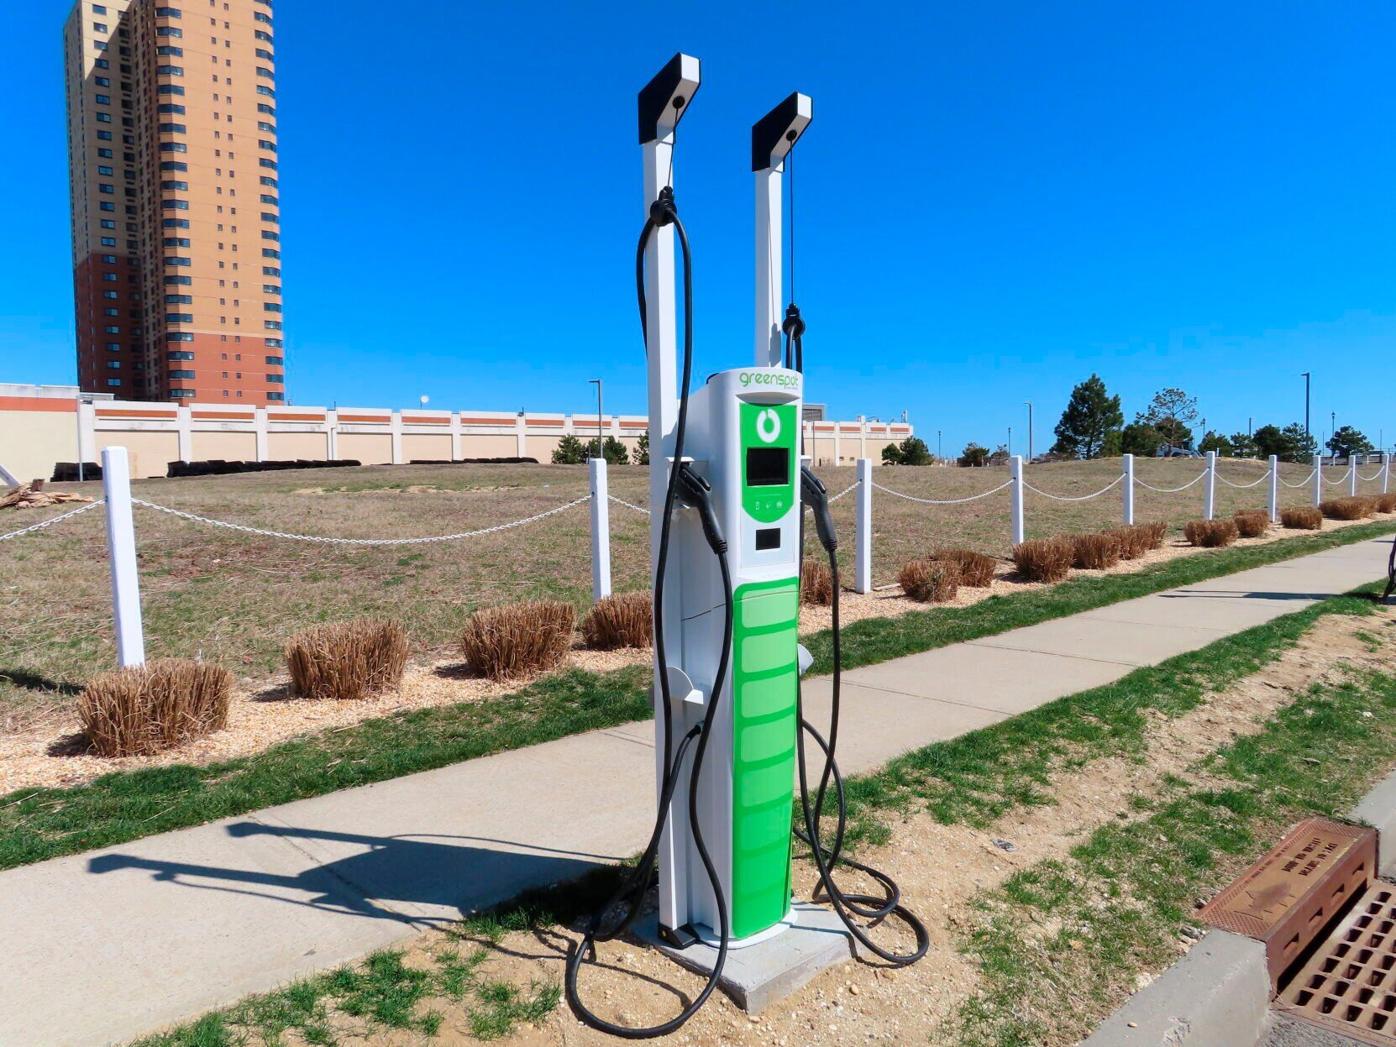 Arizona plans to build dozens of electric vehicle charging stations over  the next 5 years, Local News